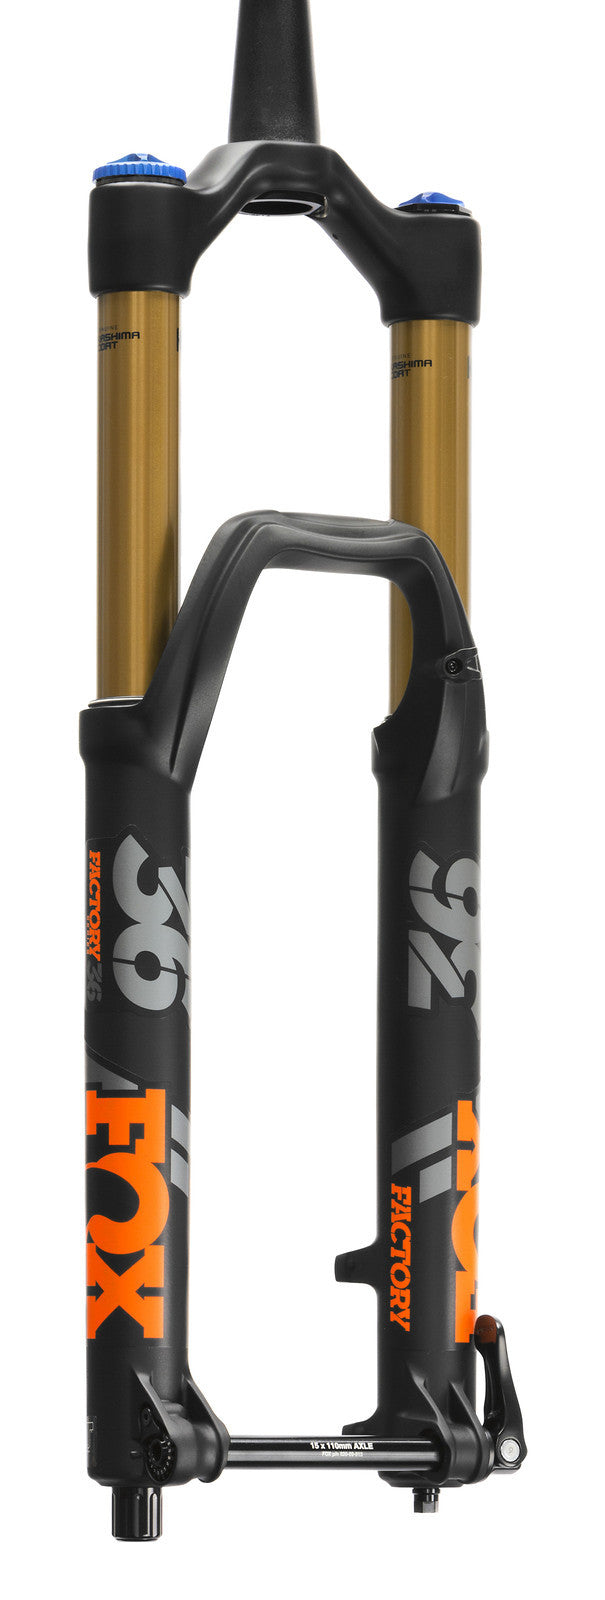 Details On The New 2018 Fox Float 36 Fork | Worldwide Cyclery